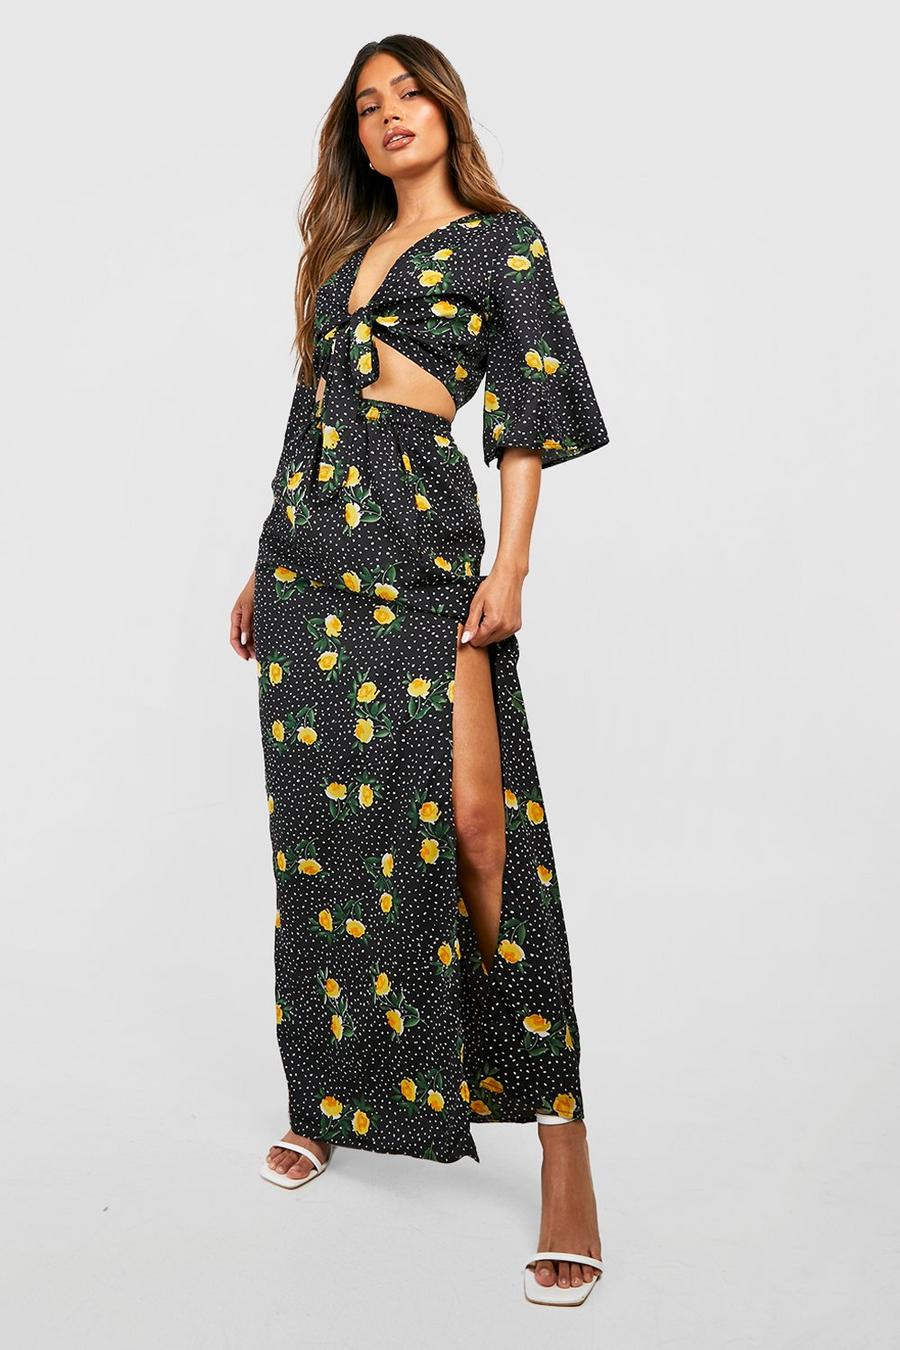 Black Knot Front Floral Mix Maxi Skirt Co-Ord Set